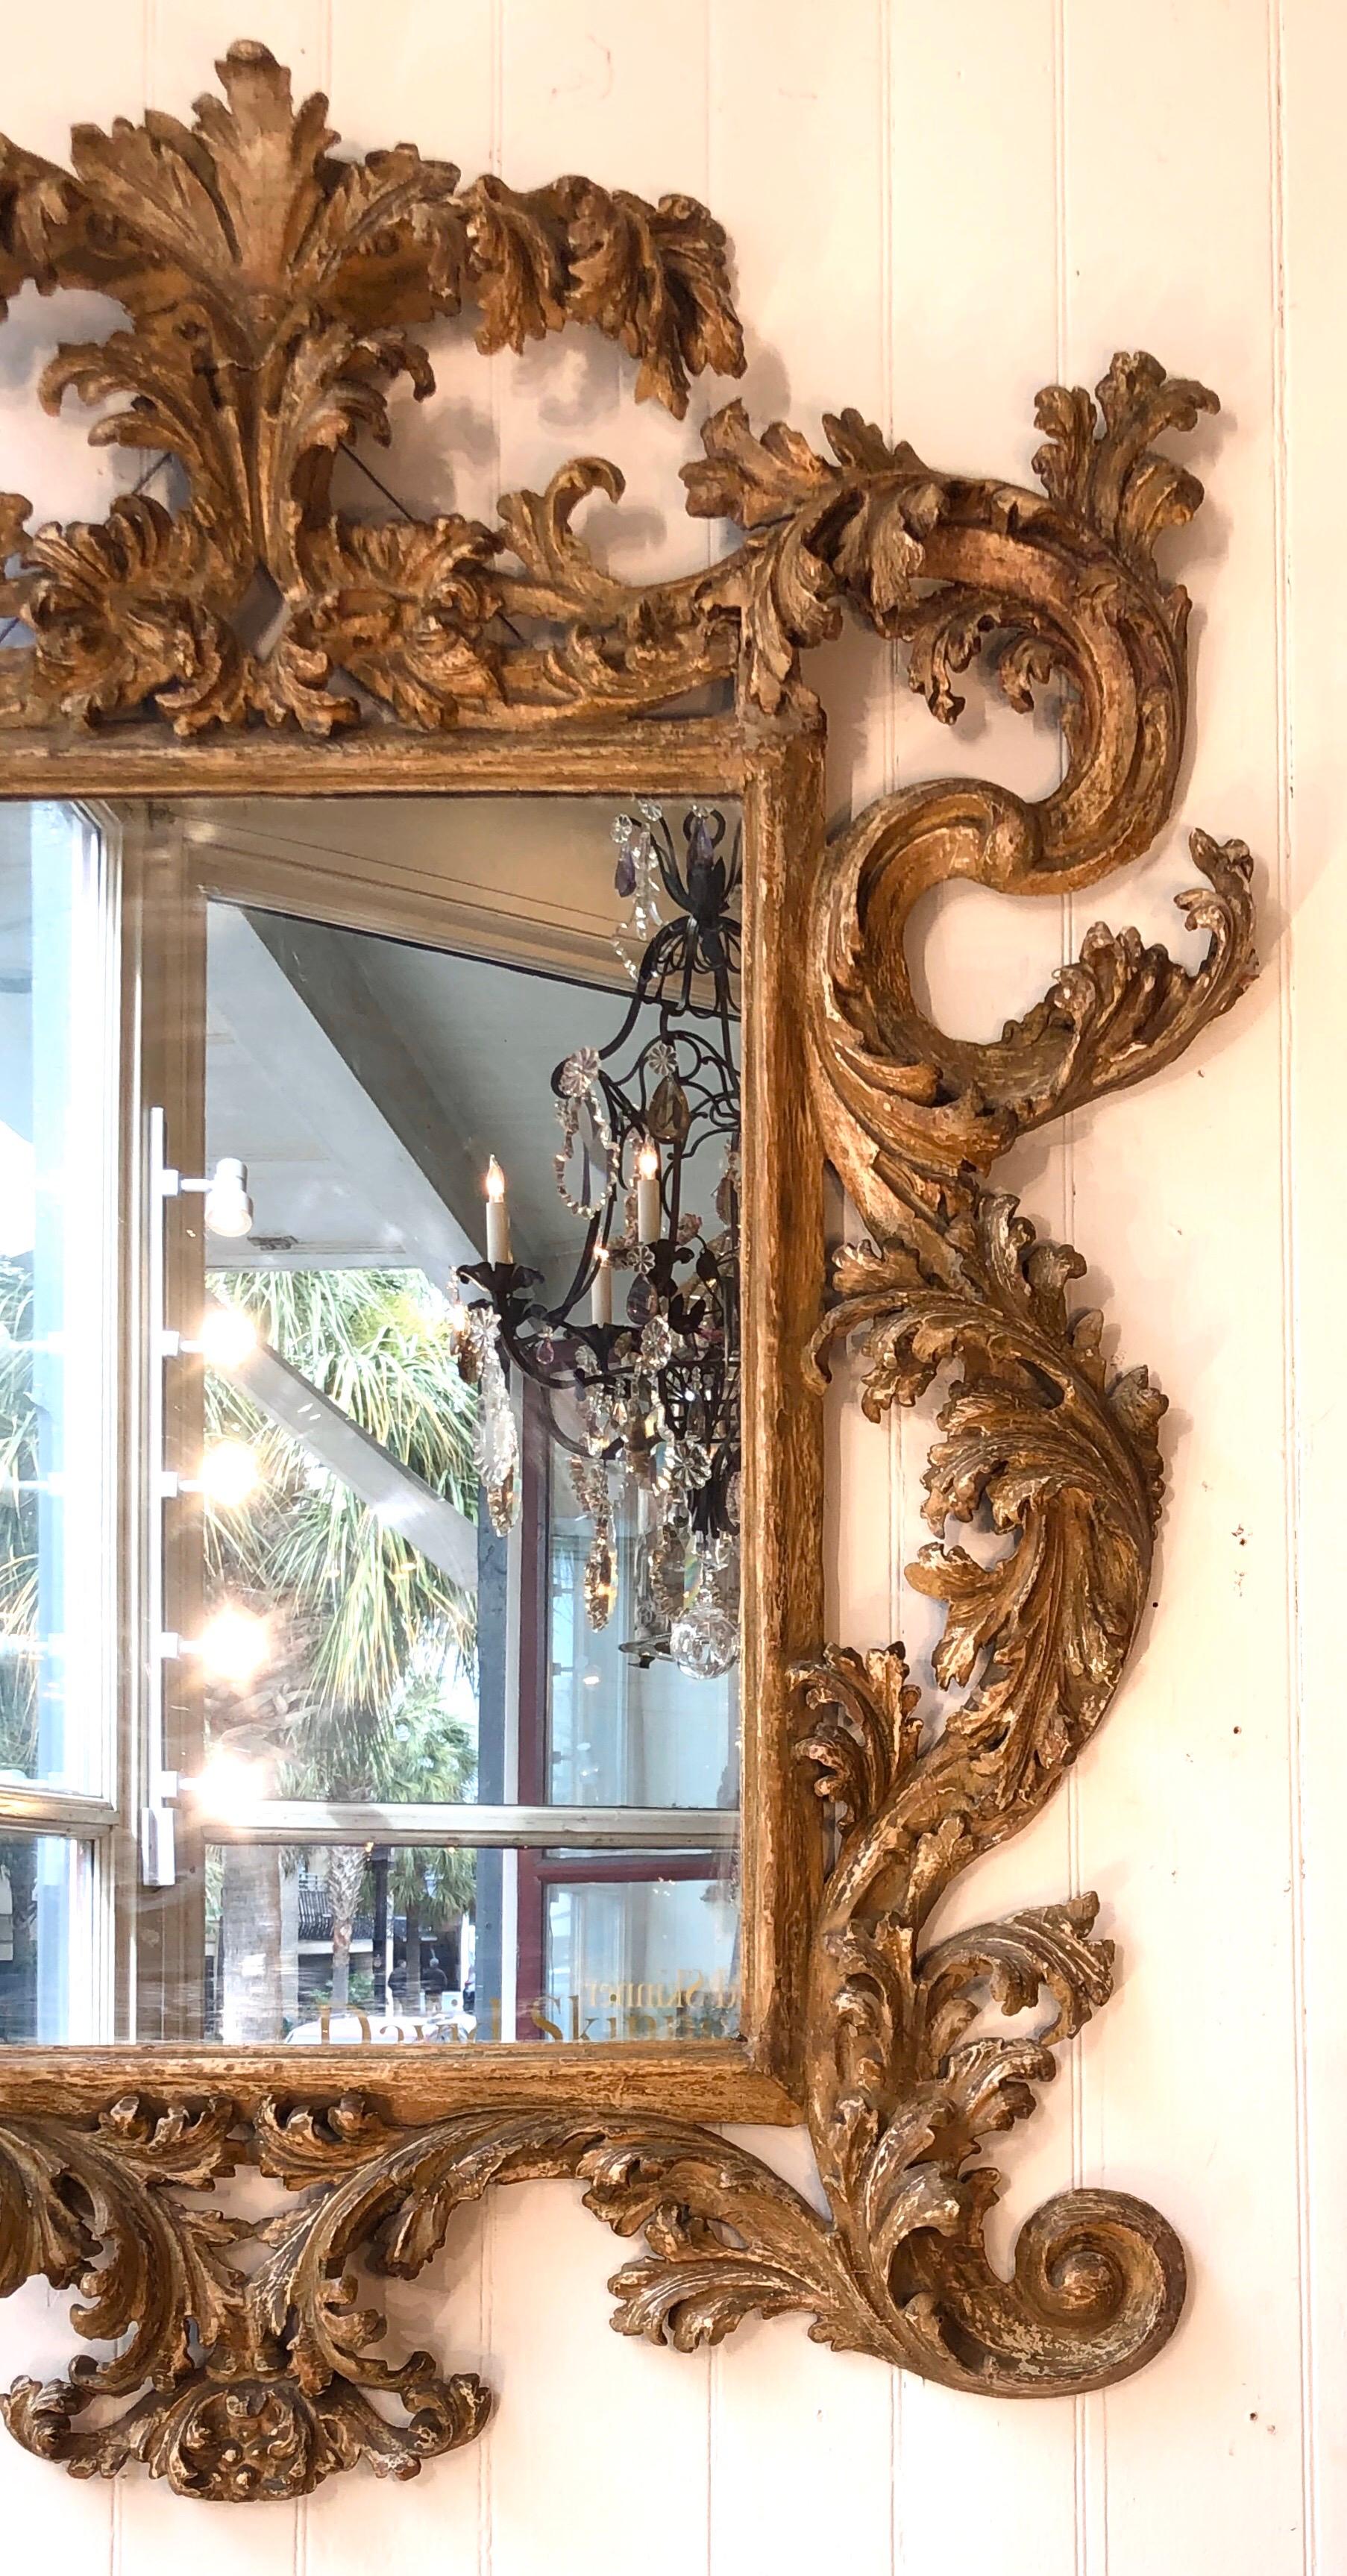 This Palatial Italian 18th century mirror has a beautiful antique worn gilt patina with shades of white and cream coming through. The foliage and scrolls that frame the mirror are classically craved. The crusty finish on this Baroque mirror is